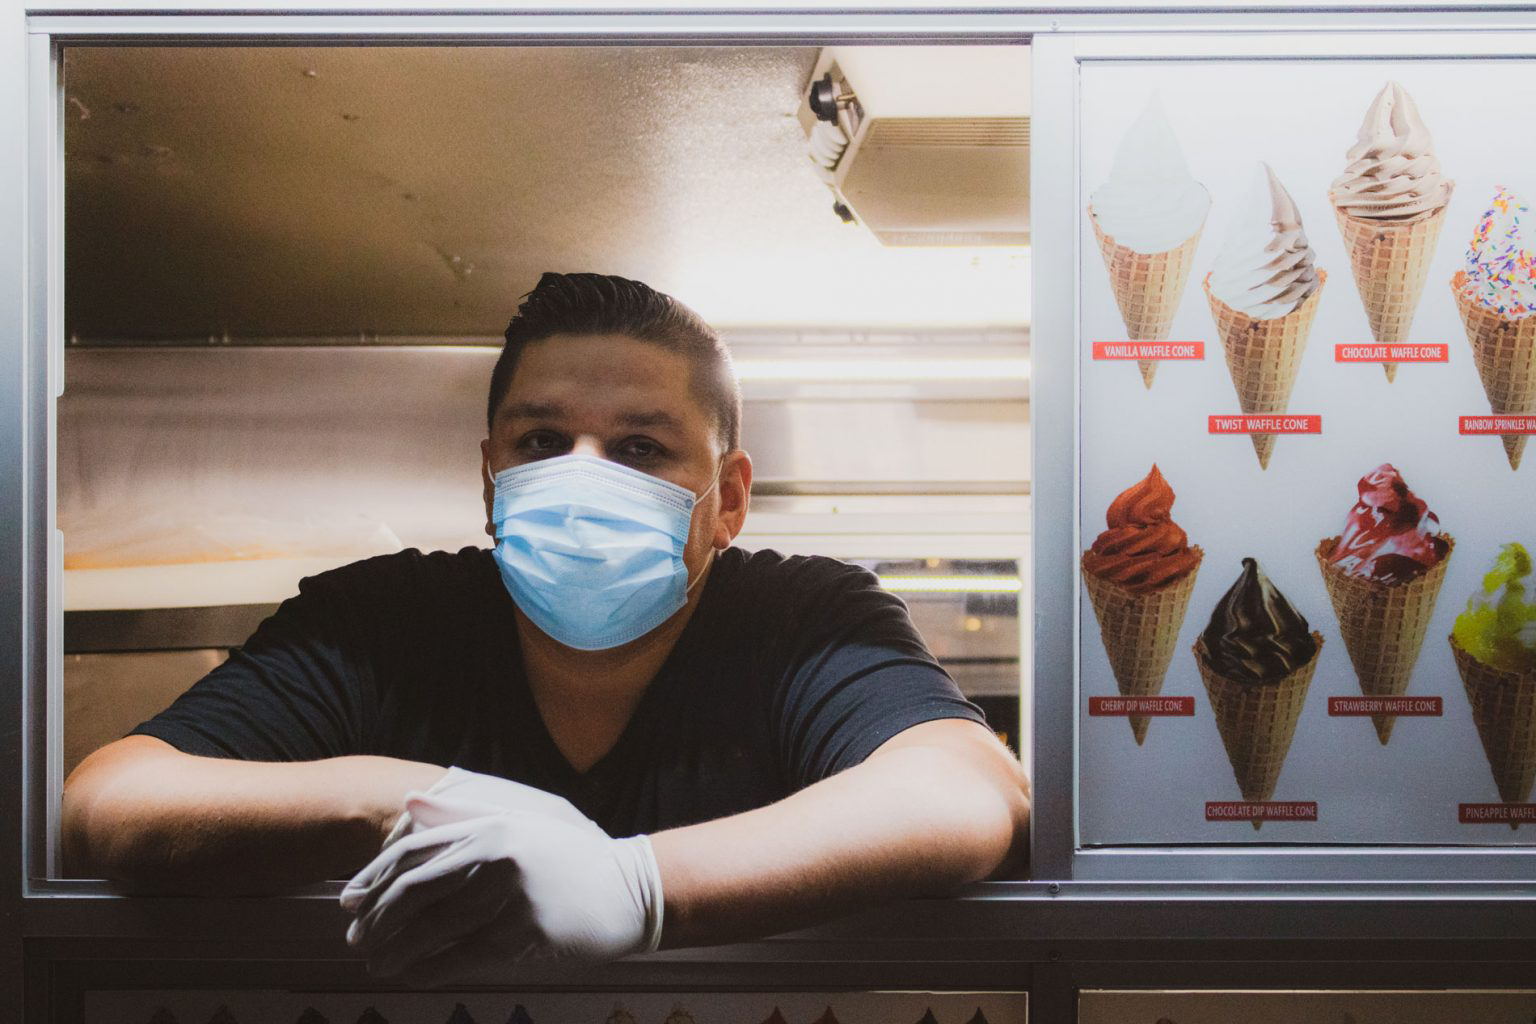 Andy Alvarez patiently waiting for customers inside his ice cream truck.